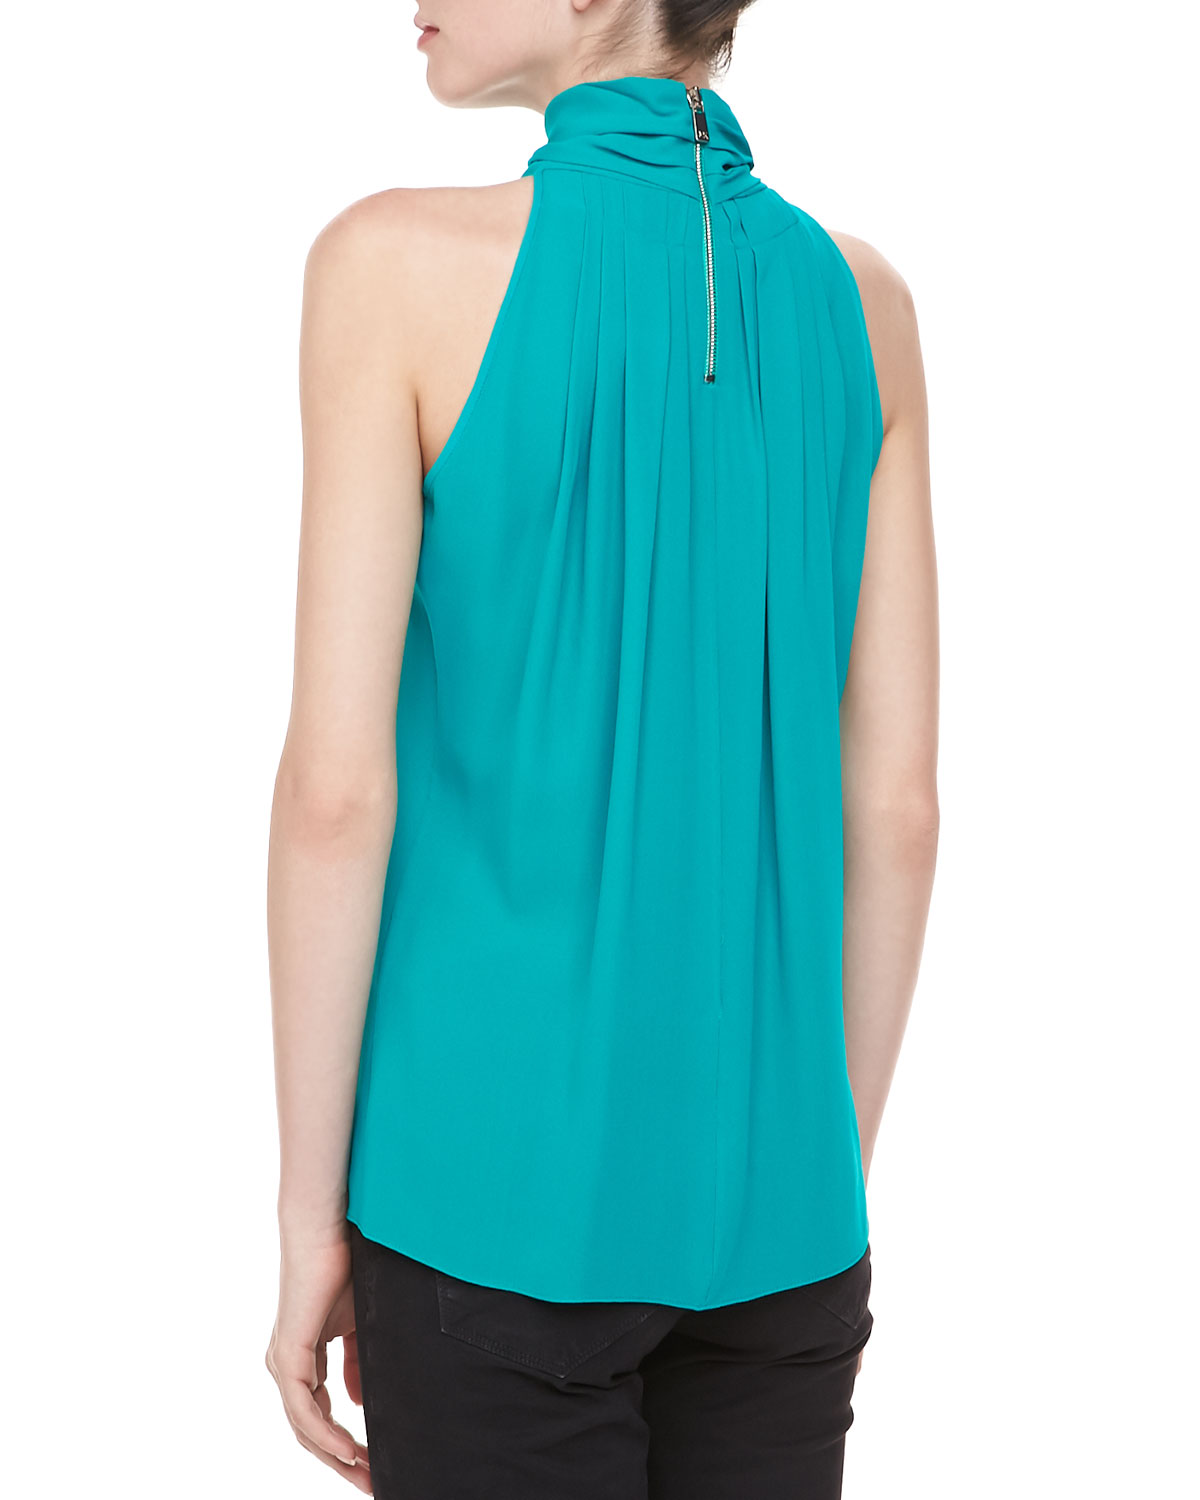 Lyst - Michael Kors Silk Georgette Pleated Top Turquoise in Blue